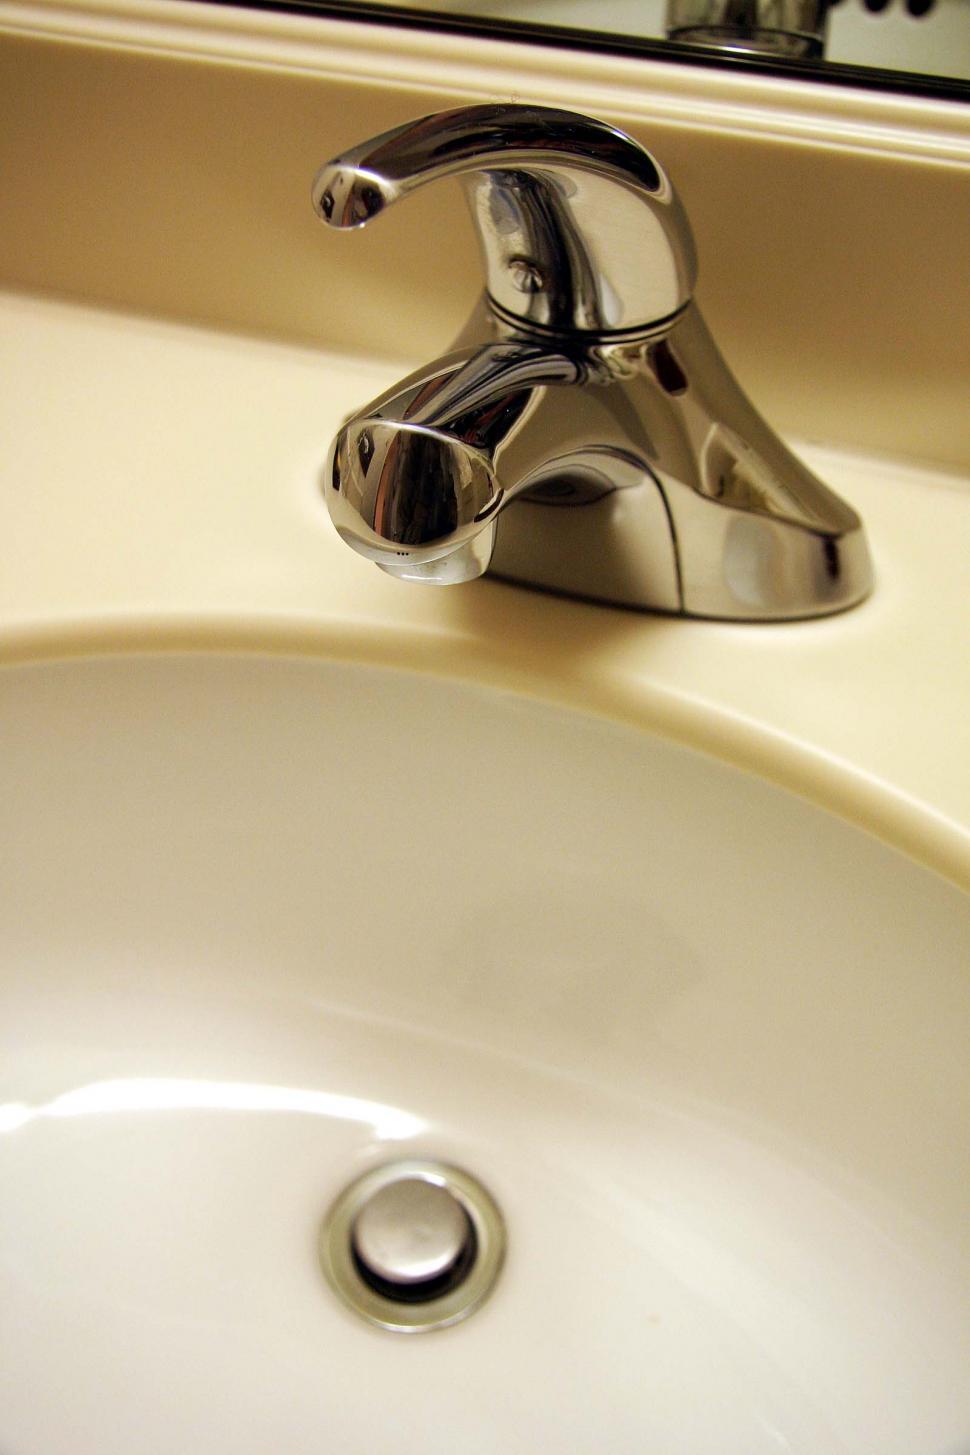 Free Image of Hotel sink 